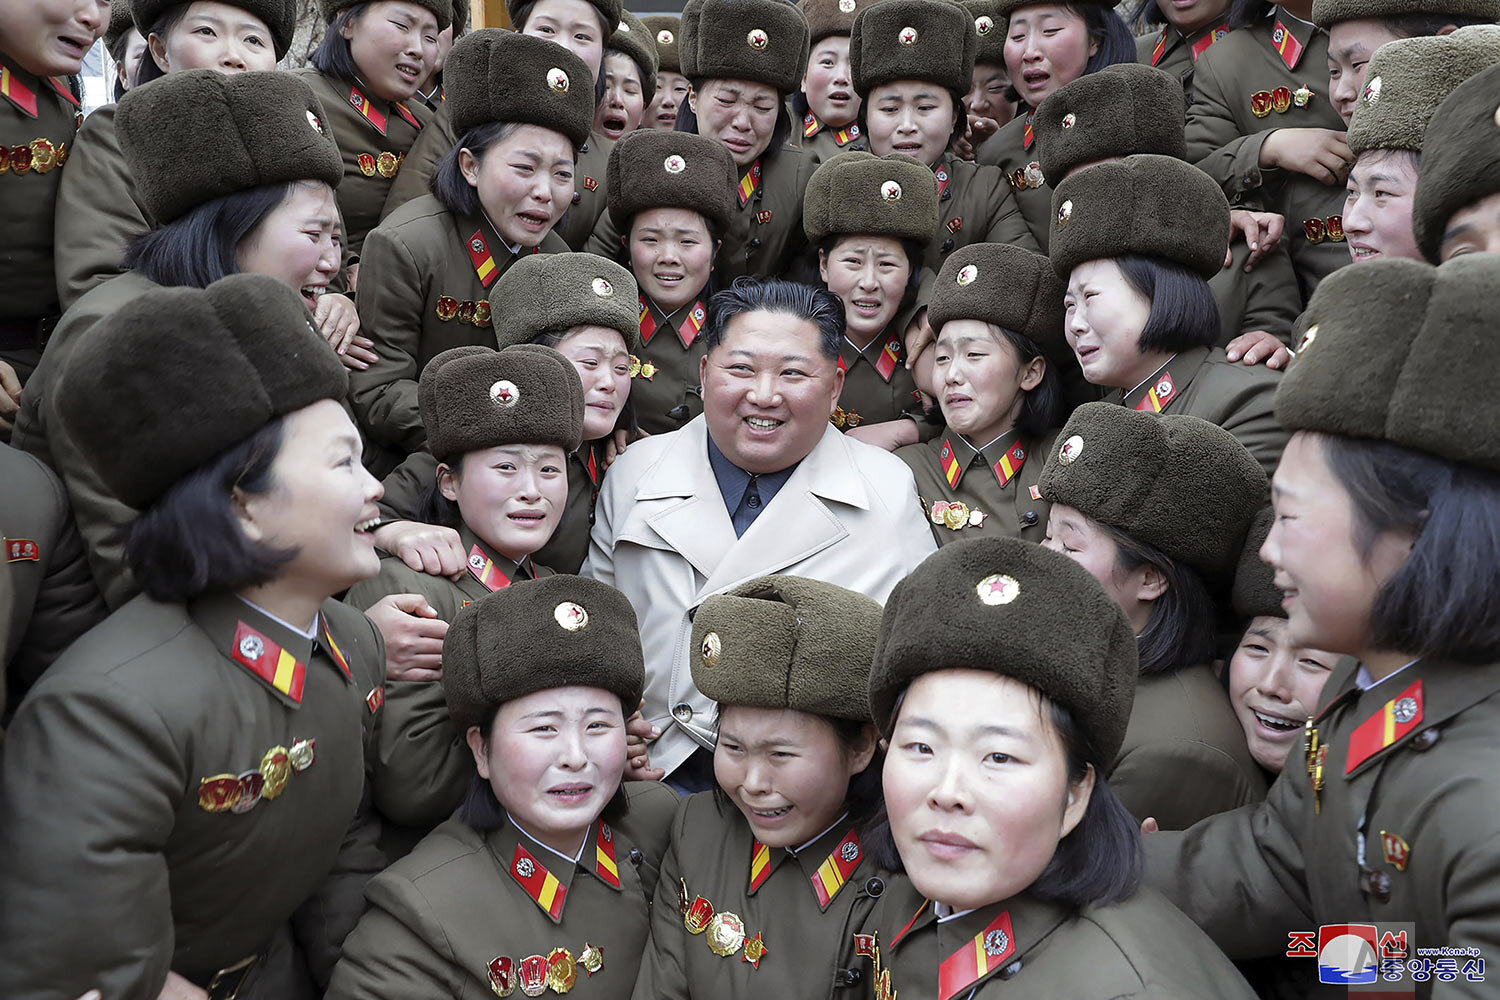  In this undated photo provided on Monday, Nov. 25, 2019, by the North Korean government, North Korean leader Kim Jong Un, center, poses as he inspects a women's company under Unit 5492 of the Korean People's Army in North Korea. (Korean Central News